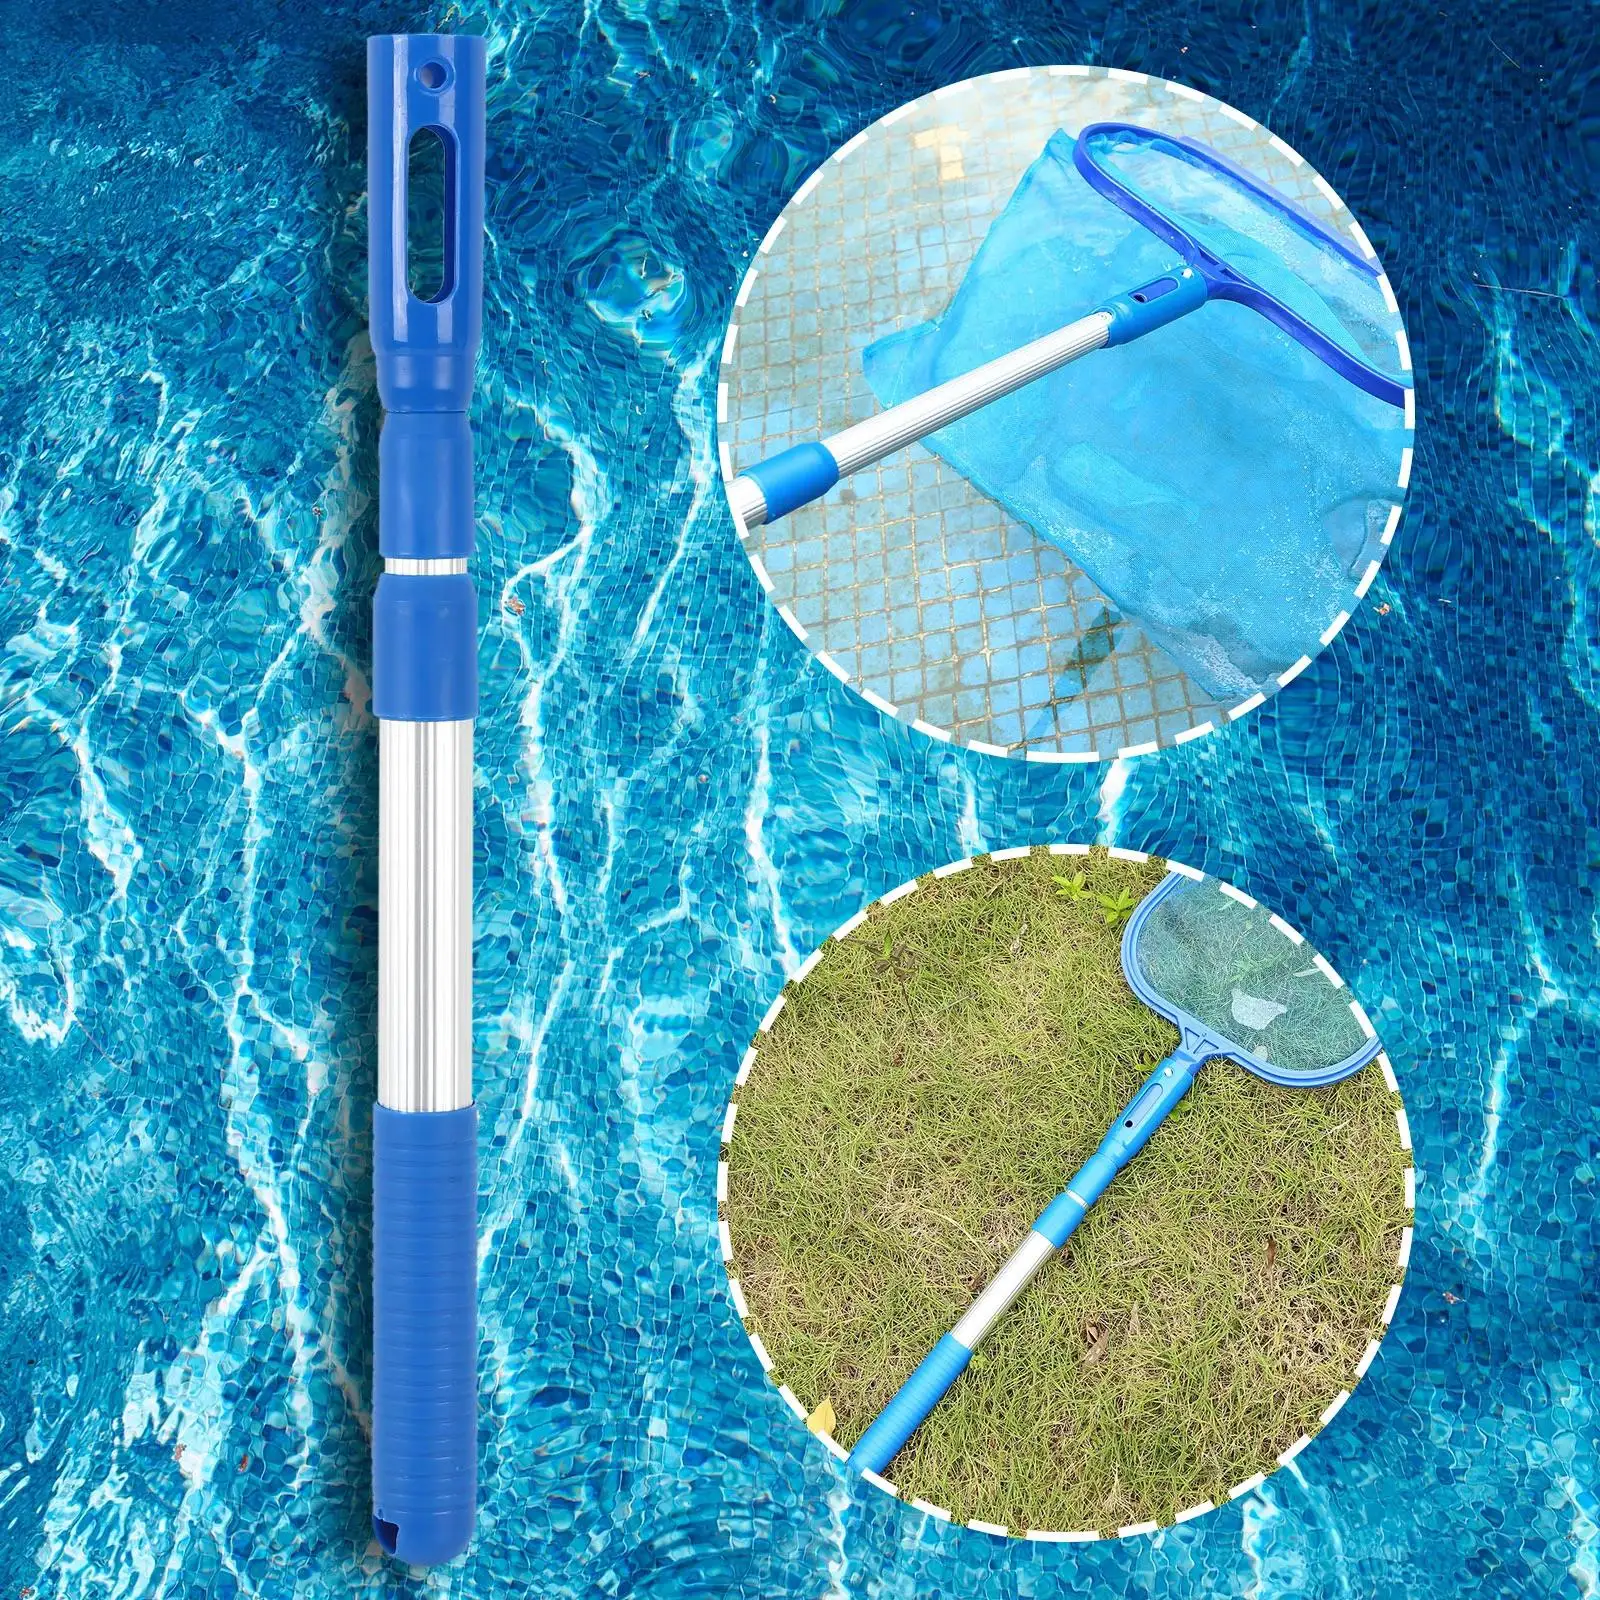 Aluminum Alloy Pool Handle 3 Stage Rod for Rakes Brushes Vacuum